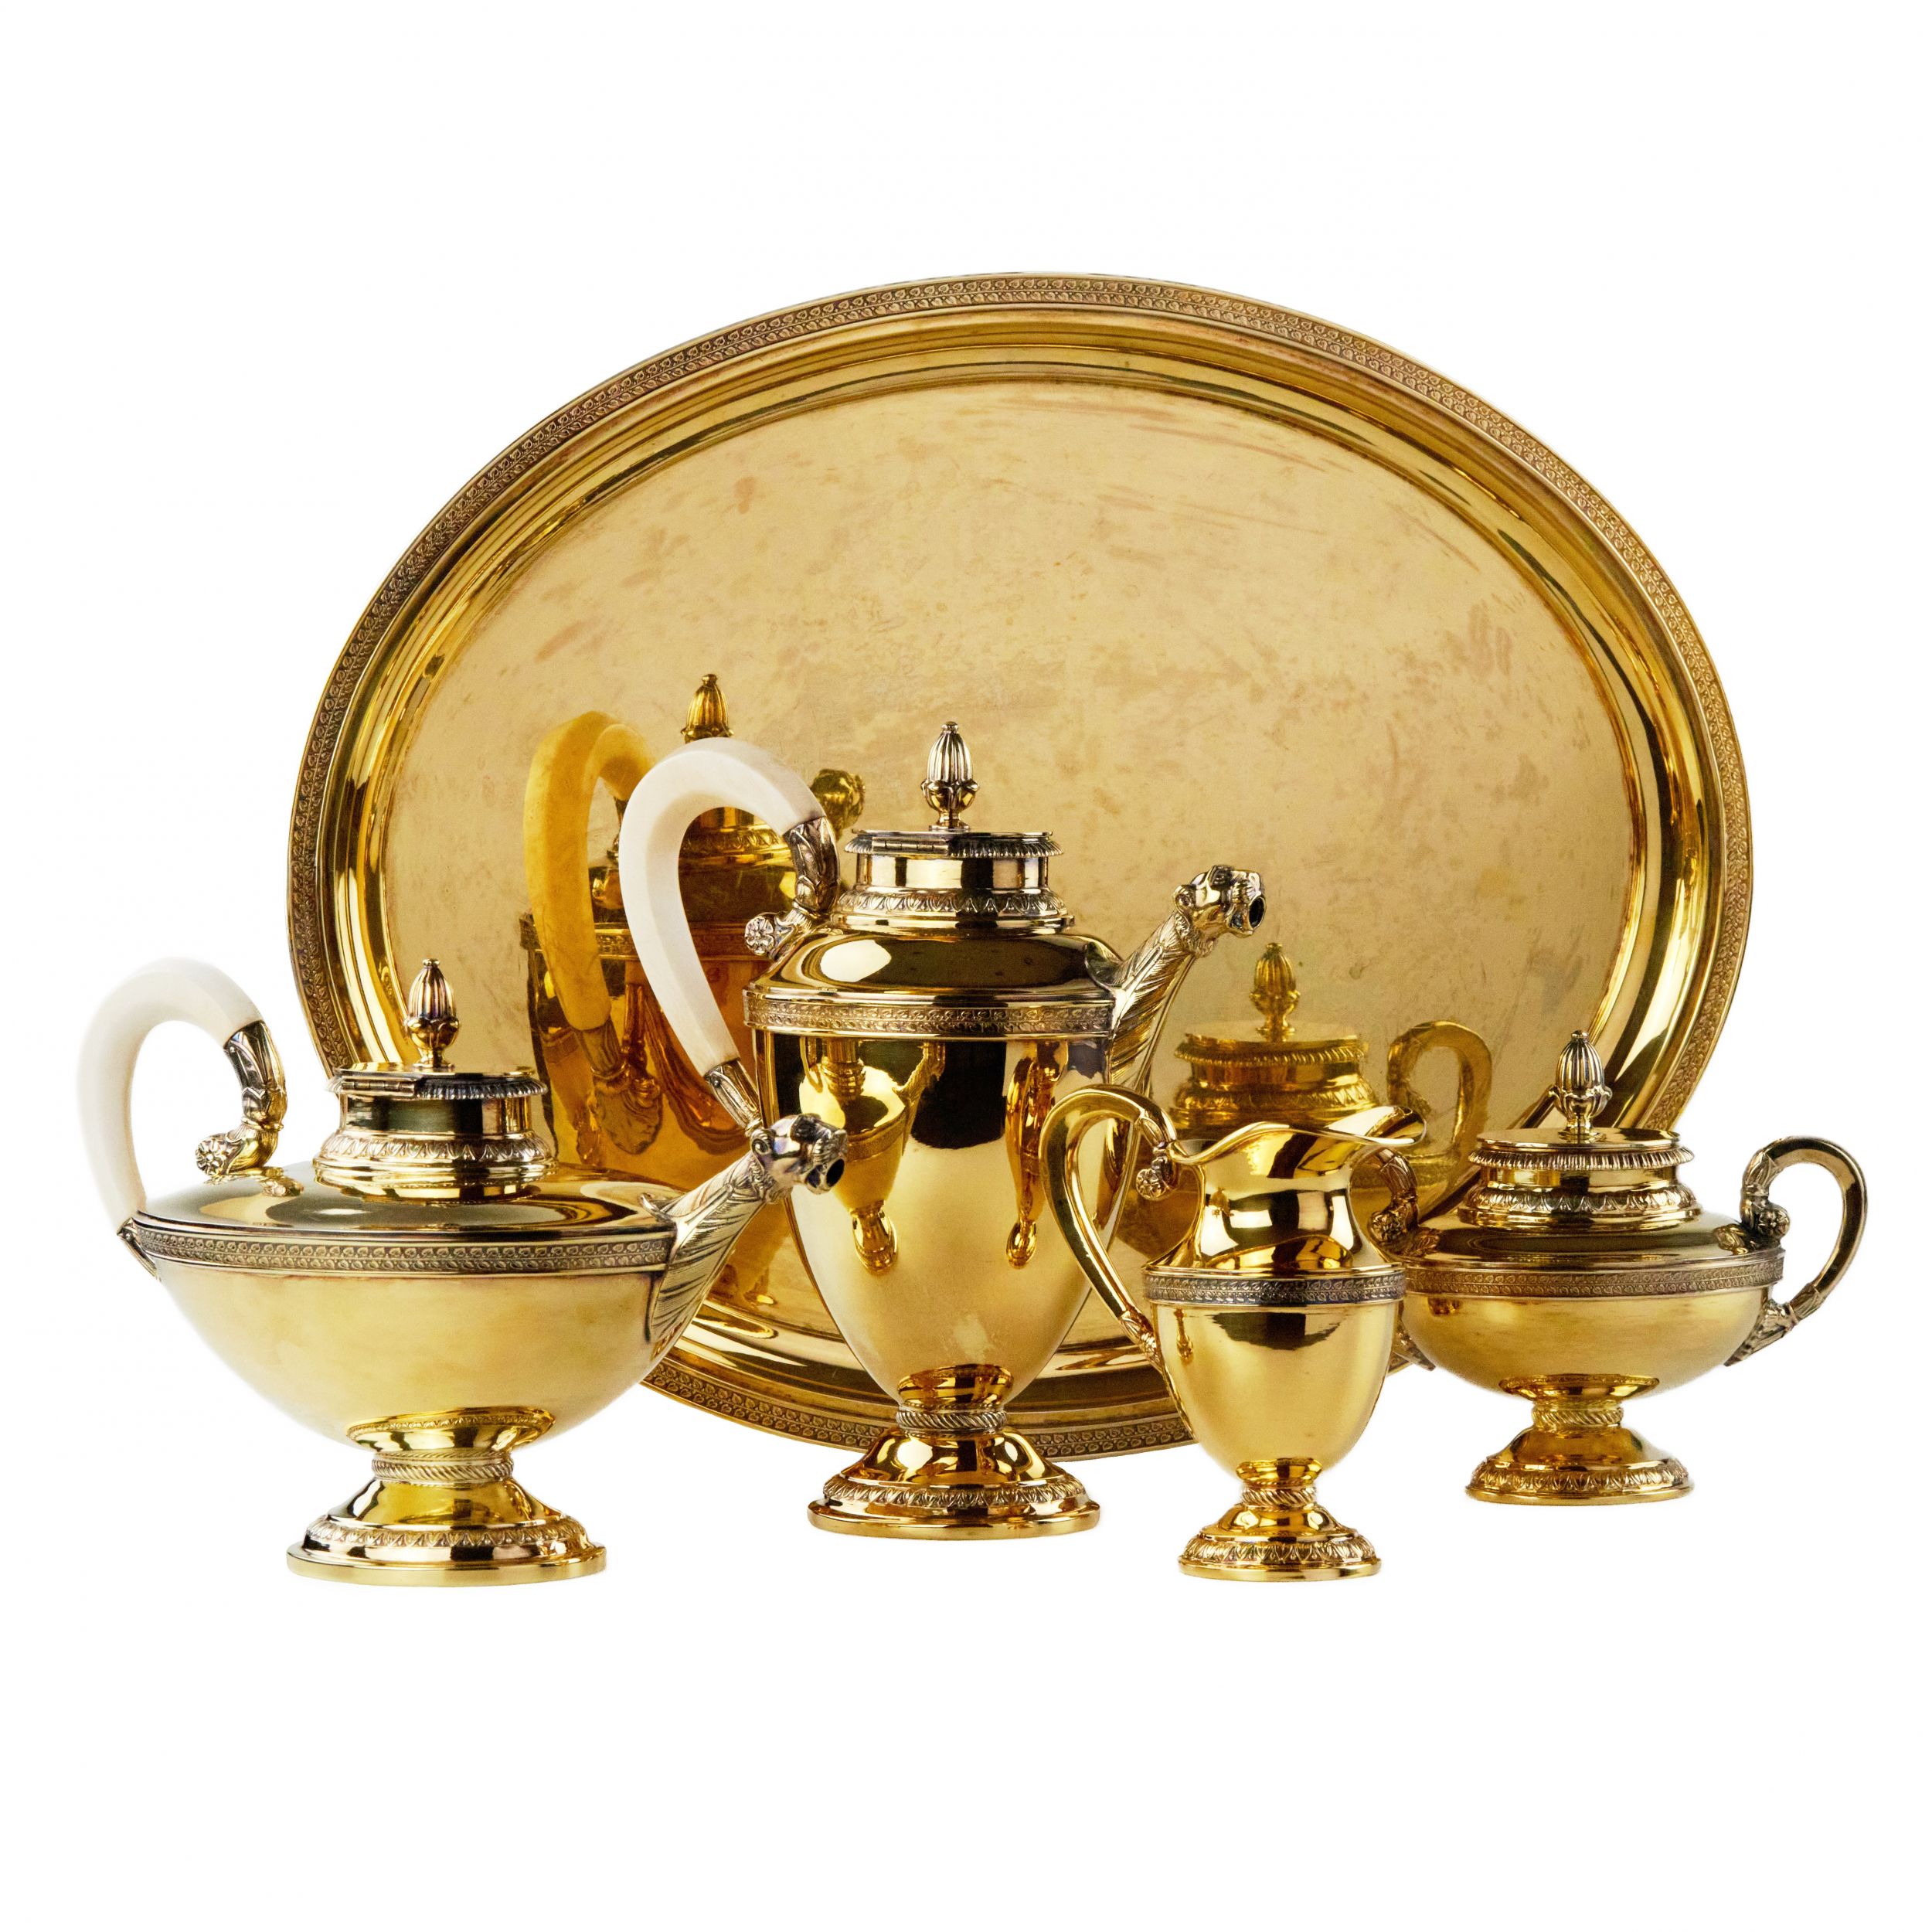 Tea and coffee service made of gilded silver. Bruckmann & Sohne. - Image 2 of 10